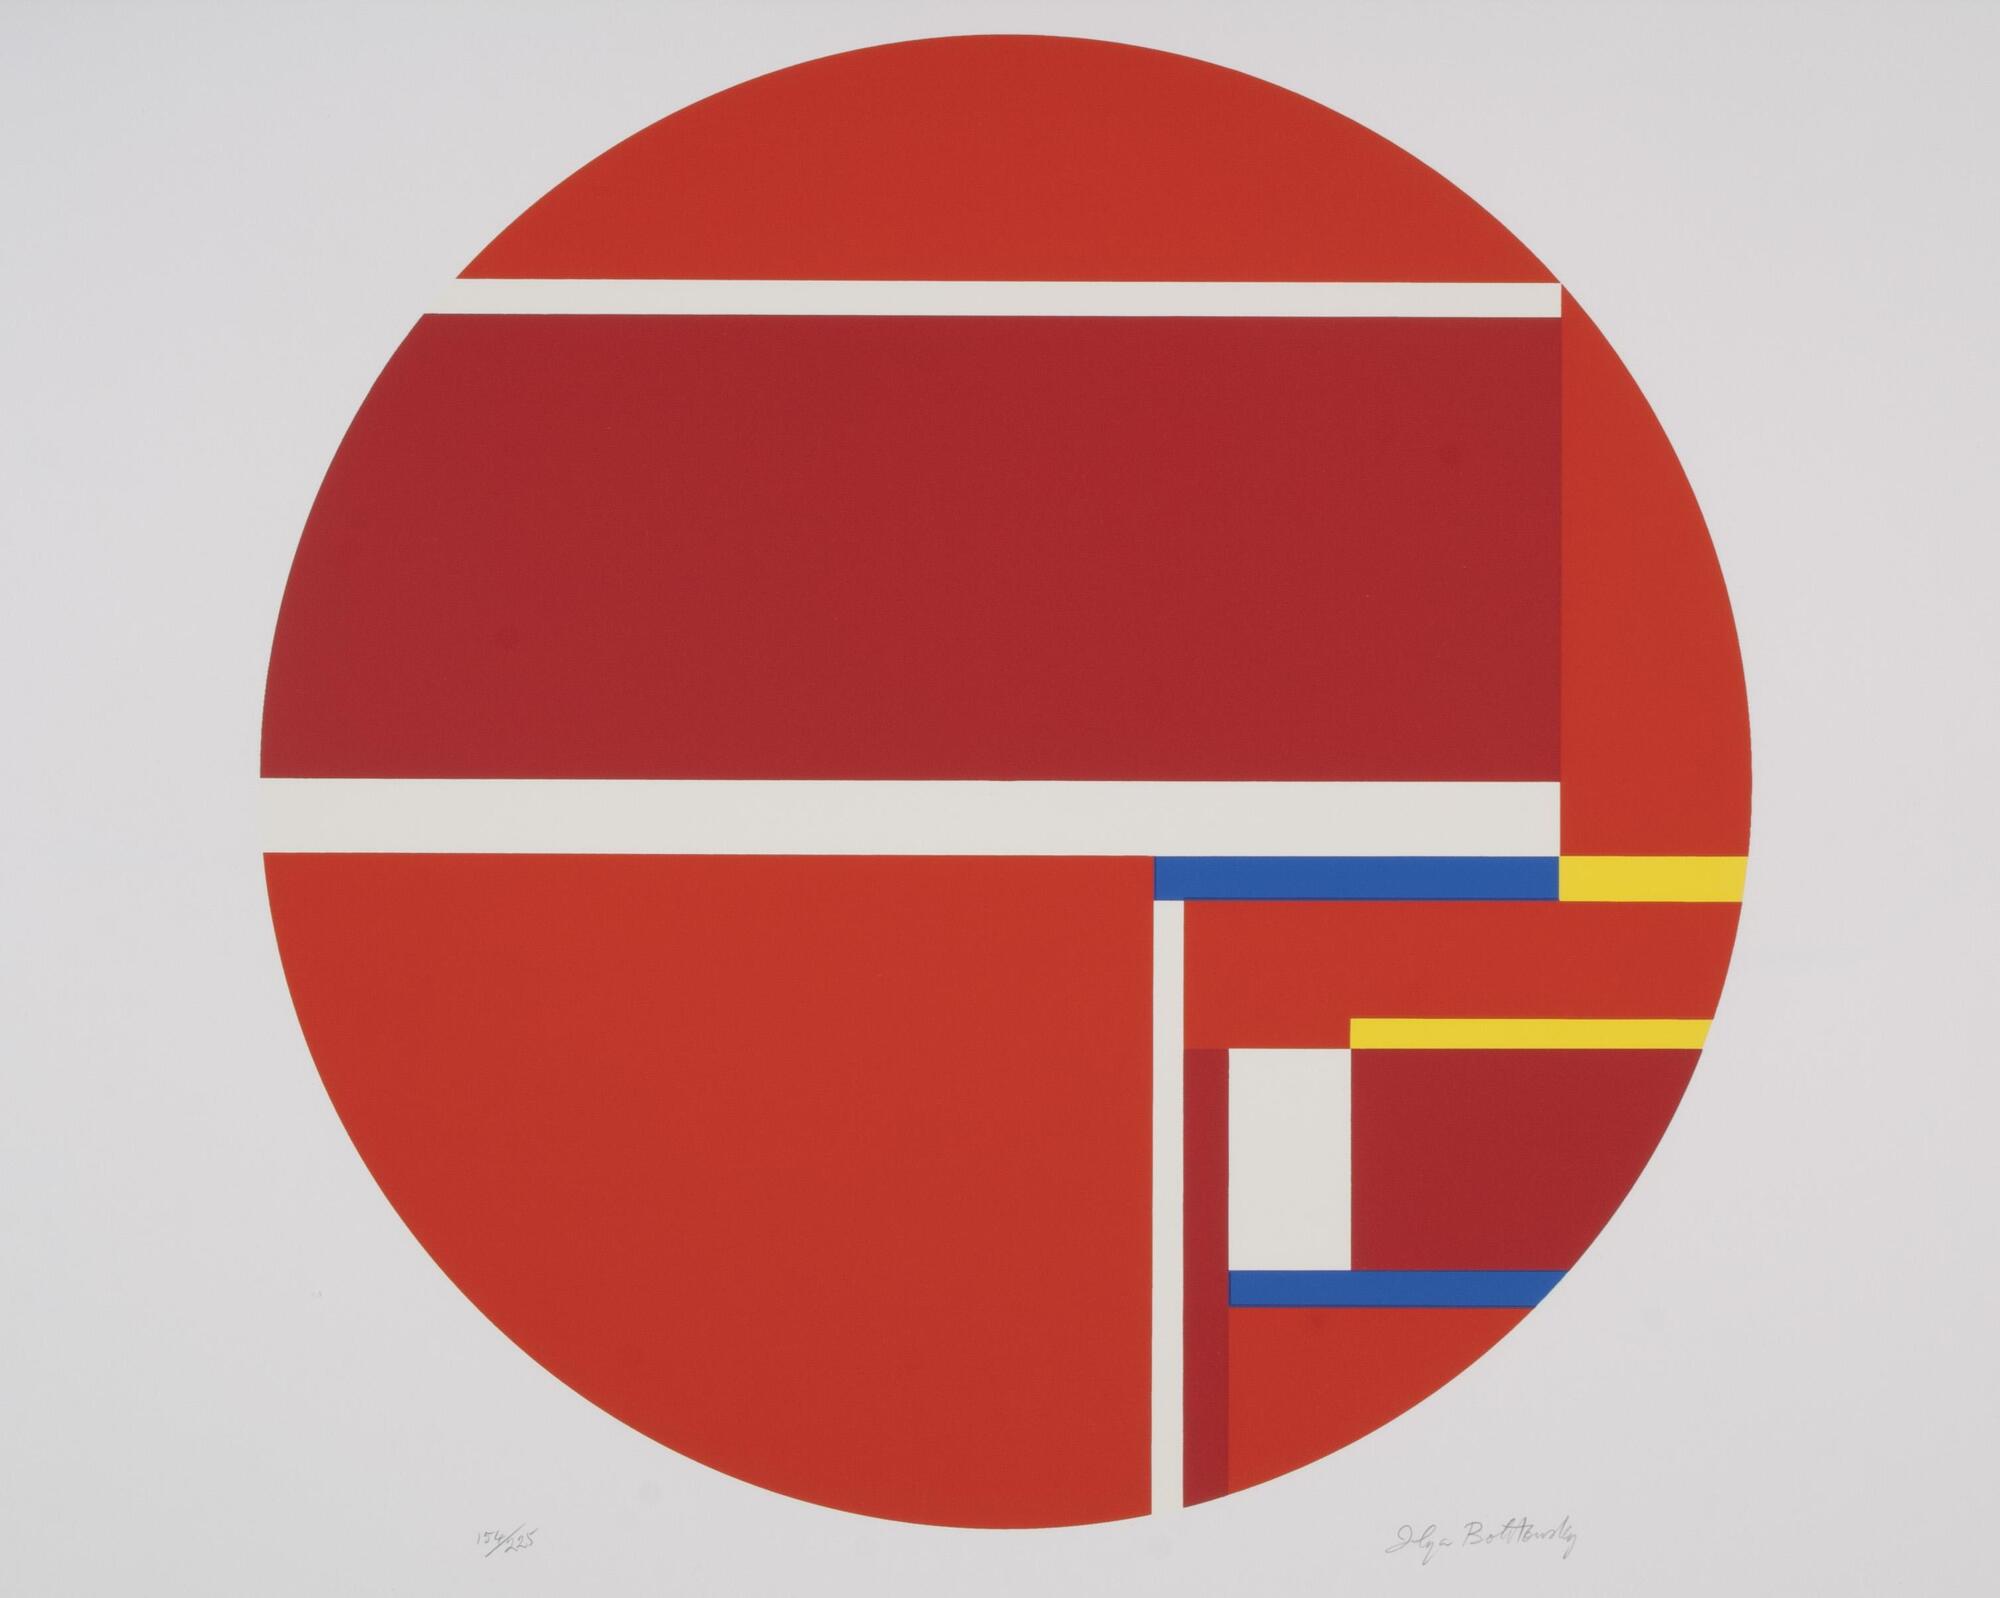 In this abstract screenprint, a large red circle is broken up by vertical and horizontal white lines. In addition, there are horizontal yellow and blue lines in the bottom right portion of the circle. The page is signed (l.r.) "Ilya Bolotowsky" and numbered (l.l.) "154/225" in pencil.